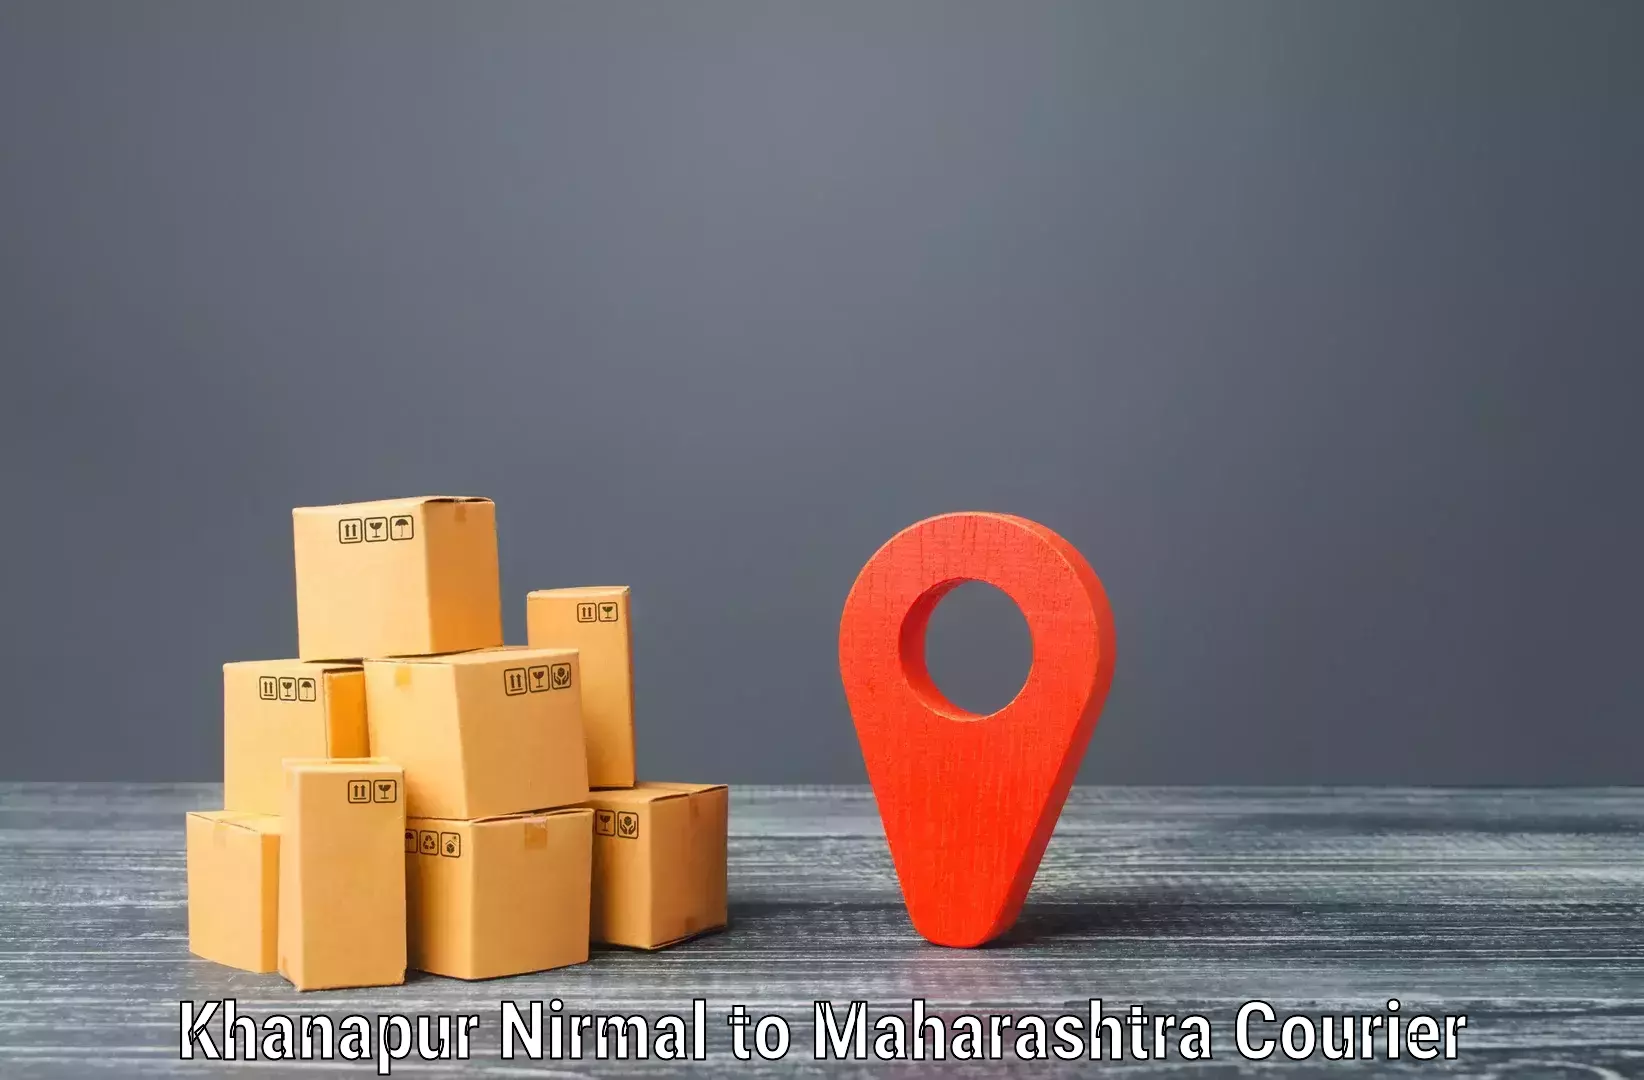 Courier service innovation Khanapur Nirmal to Greater Thane